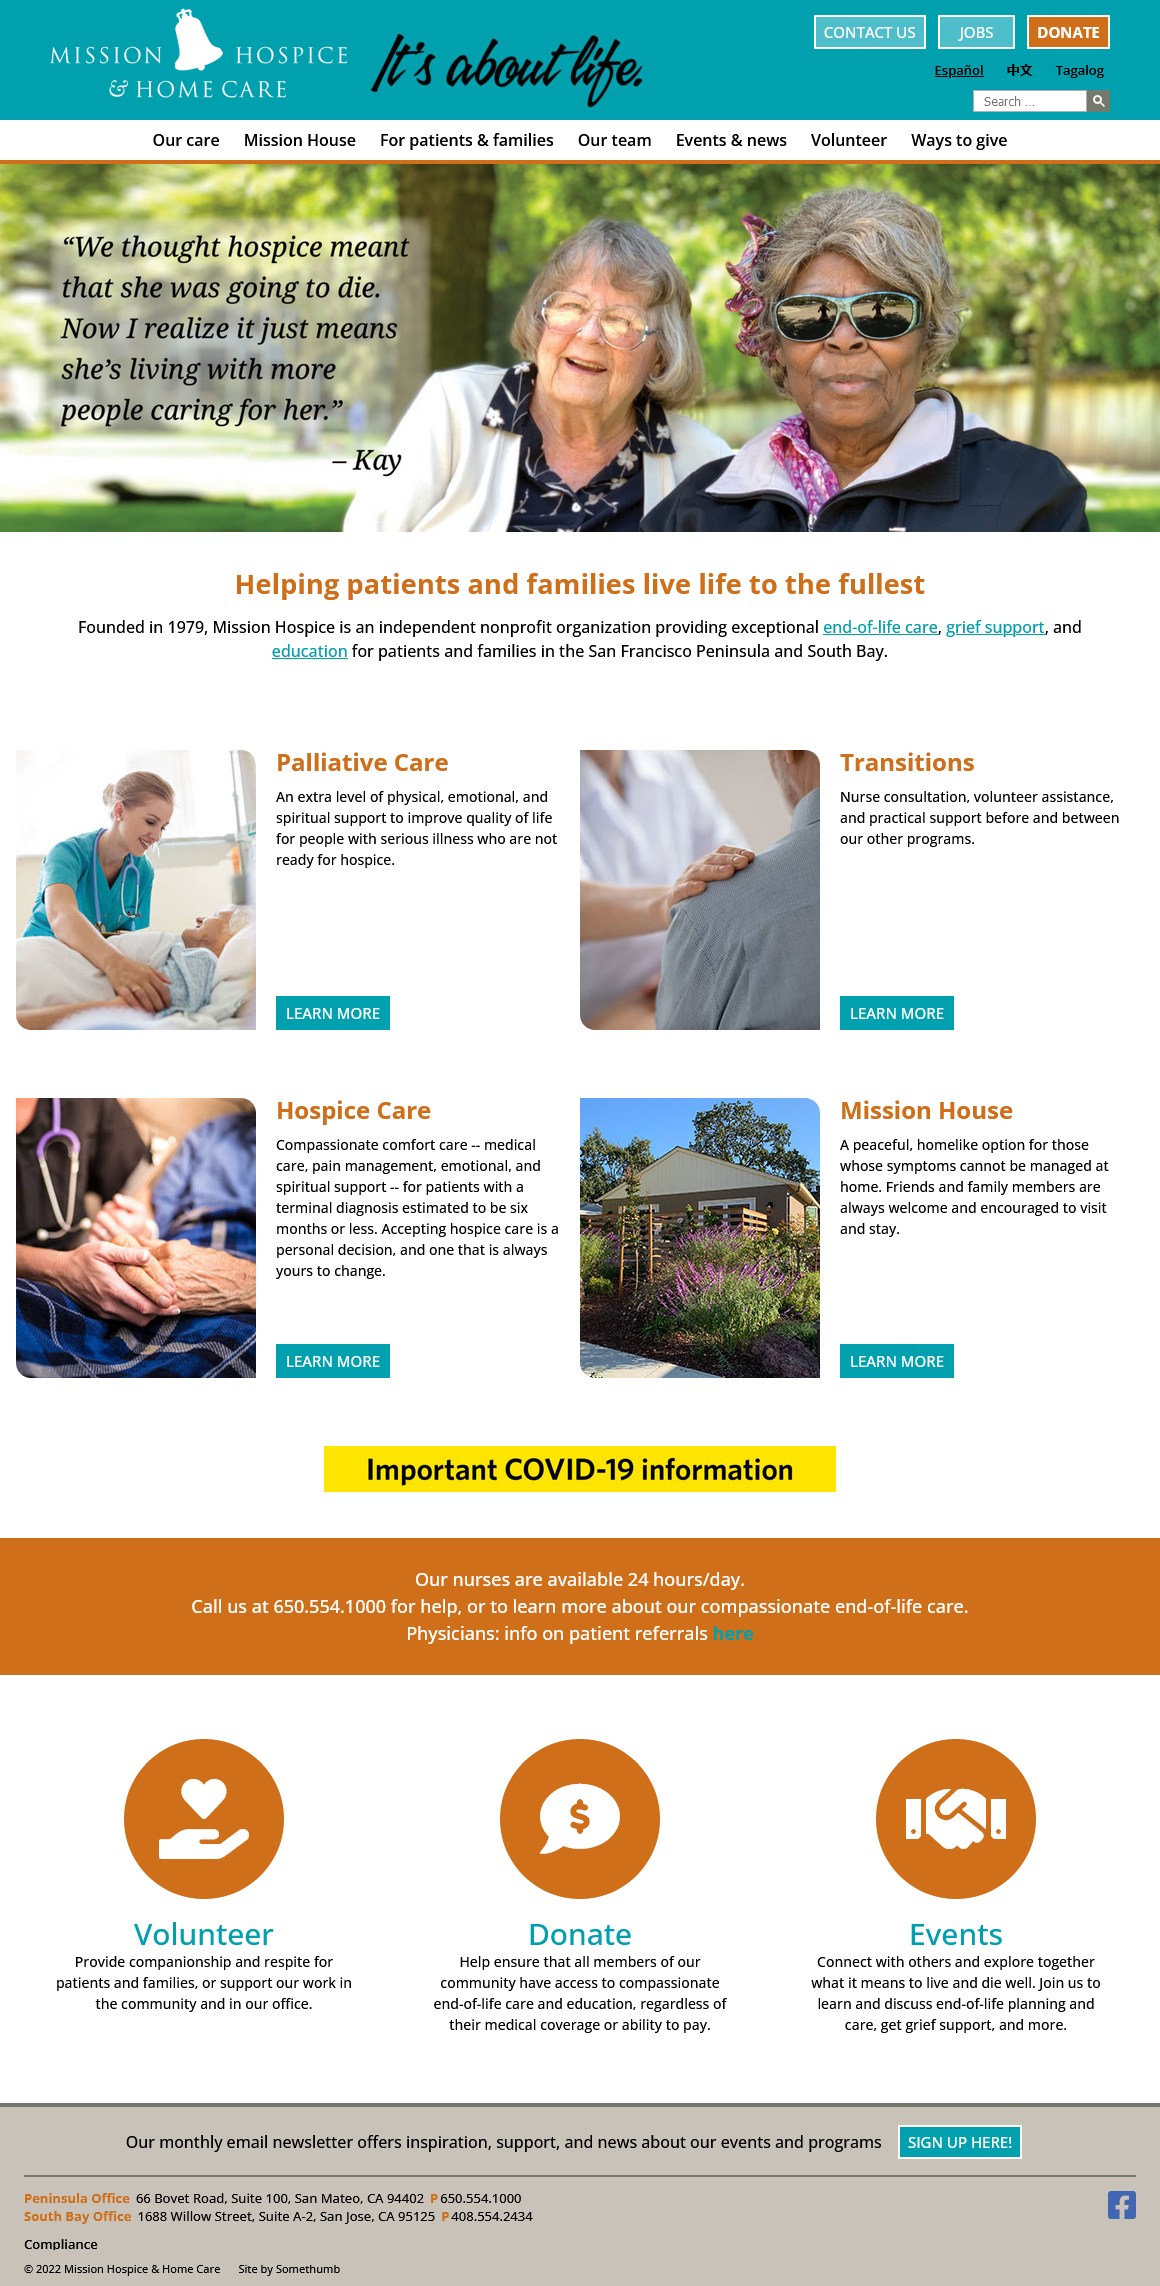 Mission Hospice & Home Care